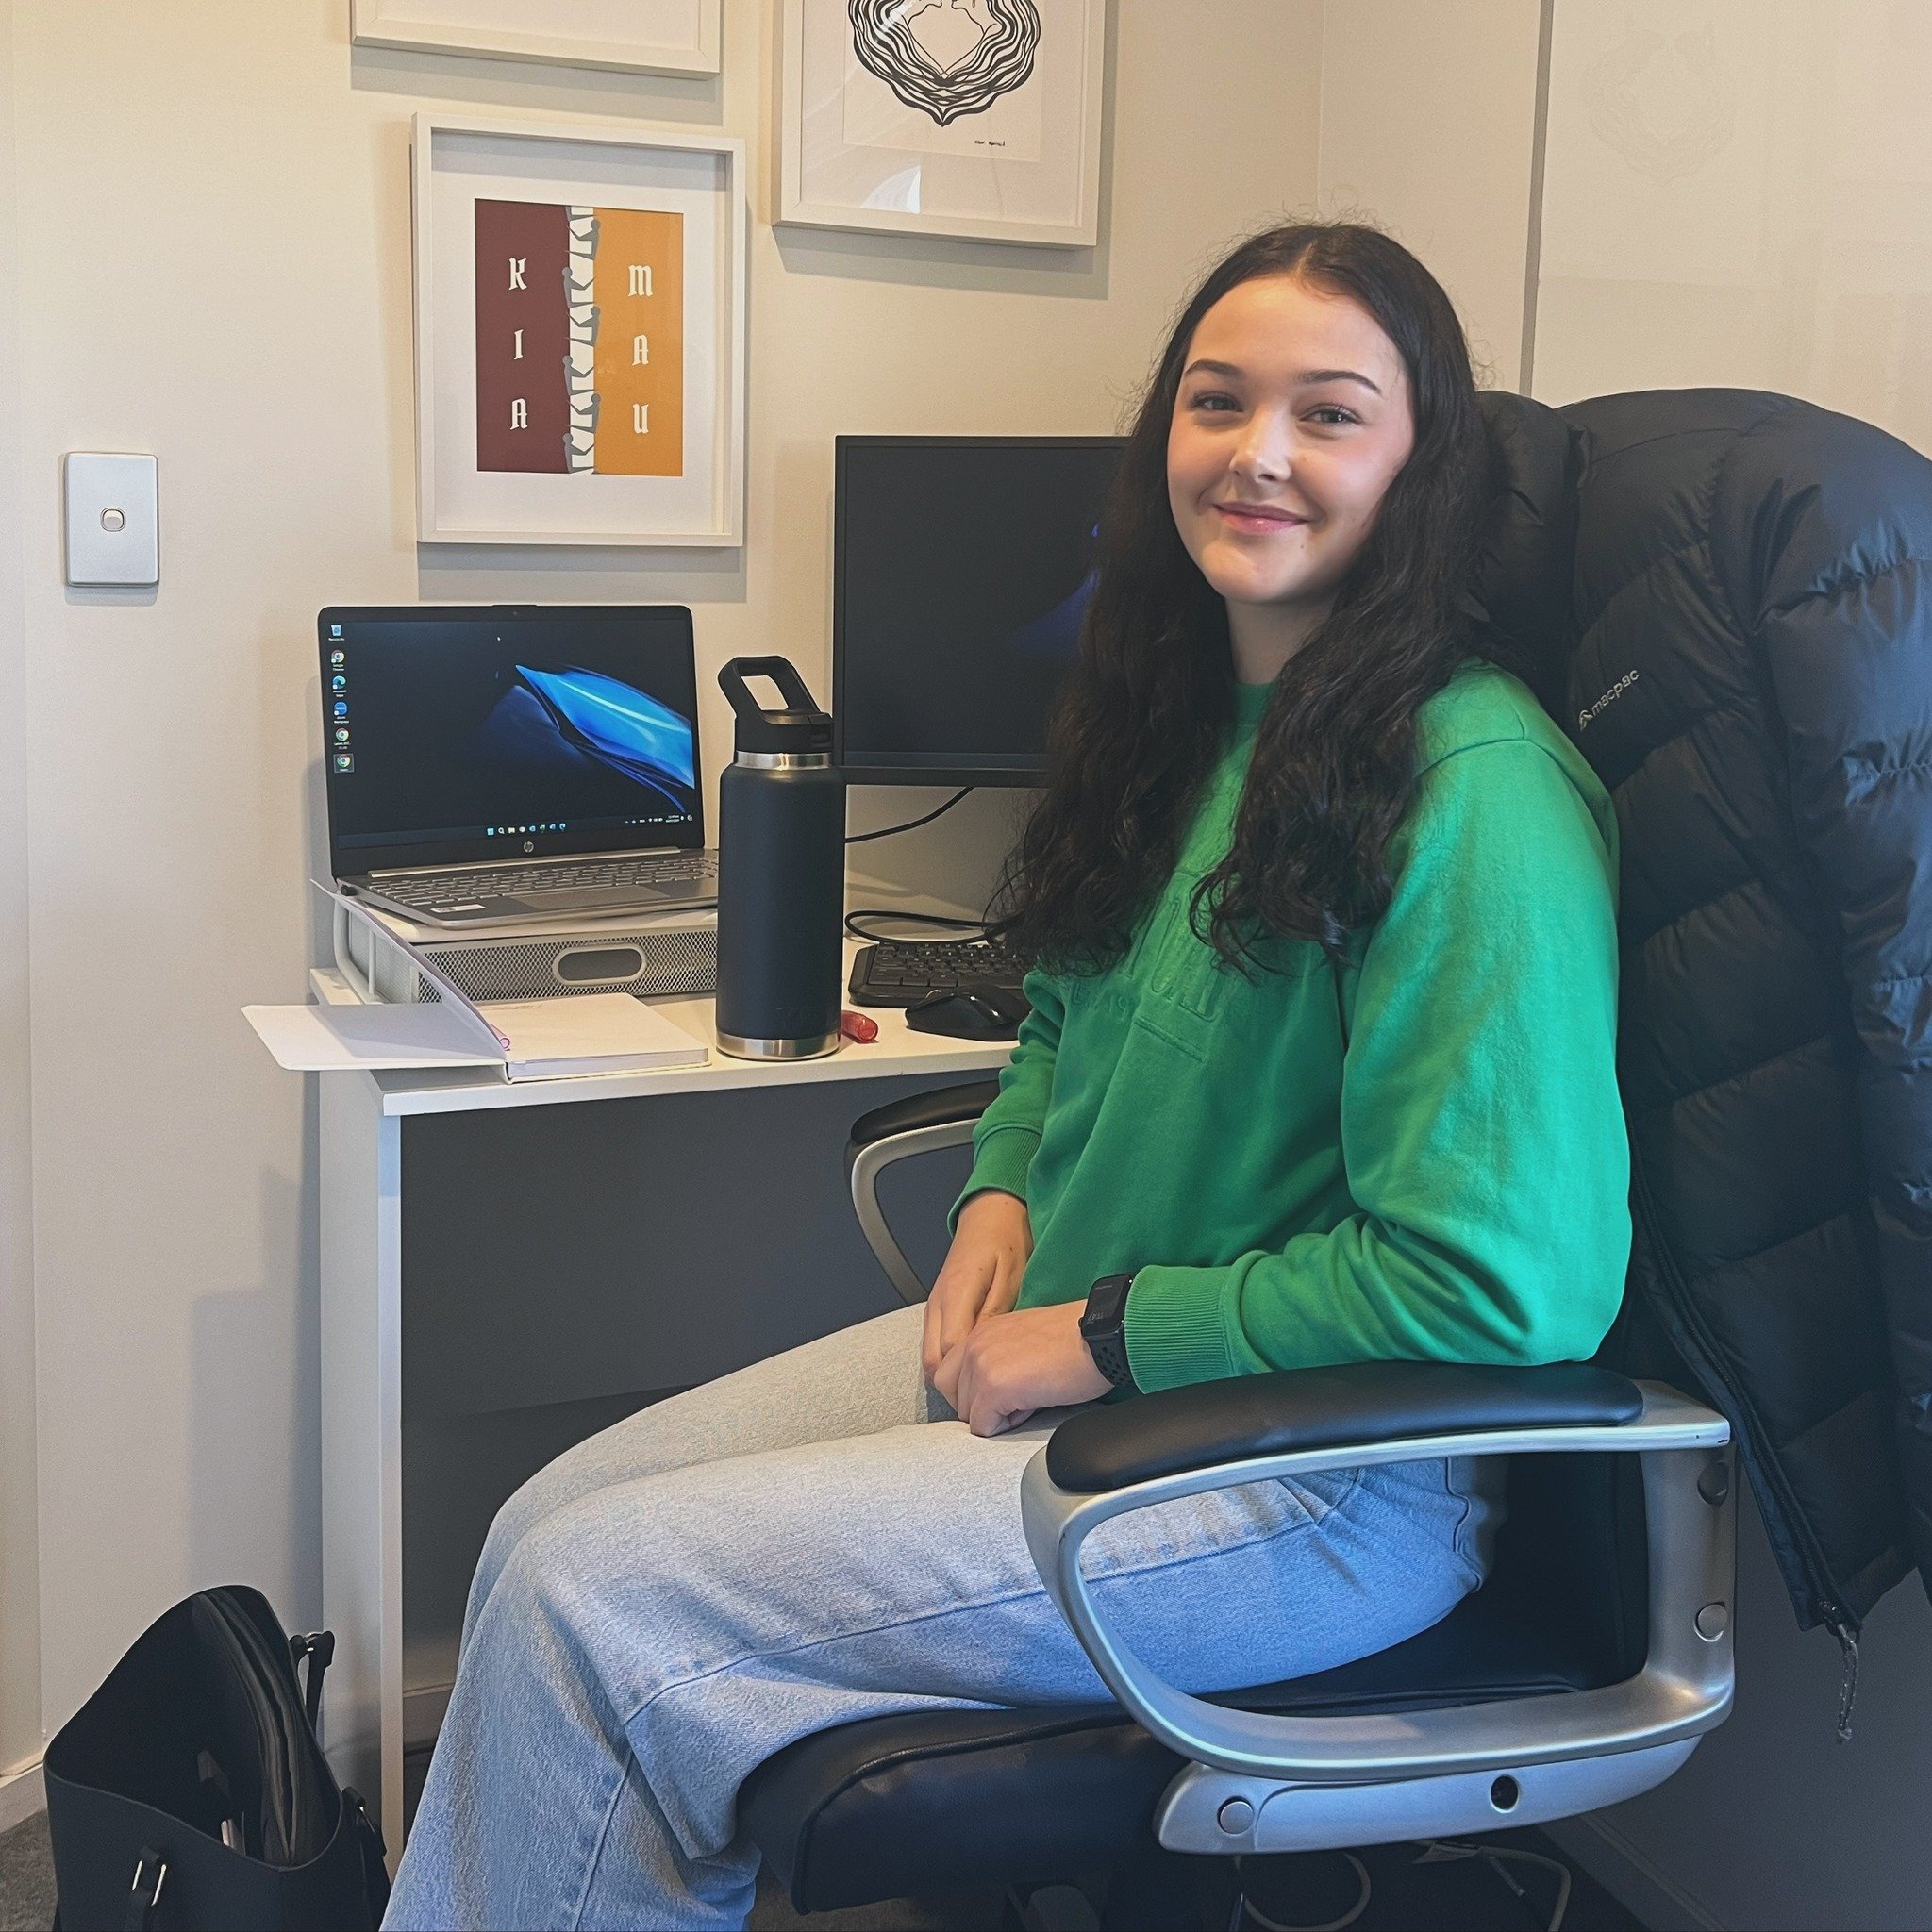 Introducing ✨ Isabella ✨ R&amp;P&rsquo;s new team member. Isabella is working with us part time as our adviser support to enable us to continue providing our clients with the best service. 

Few facts about Isabella:
- Full time studying at UC 📚 
- 